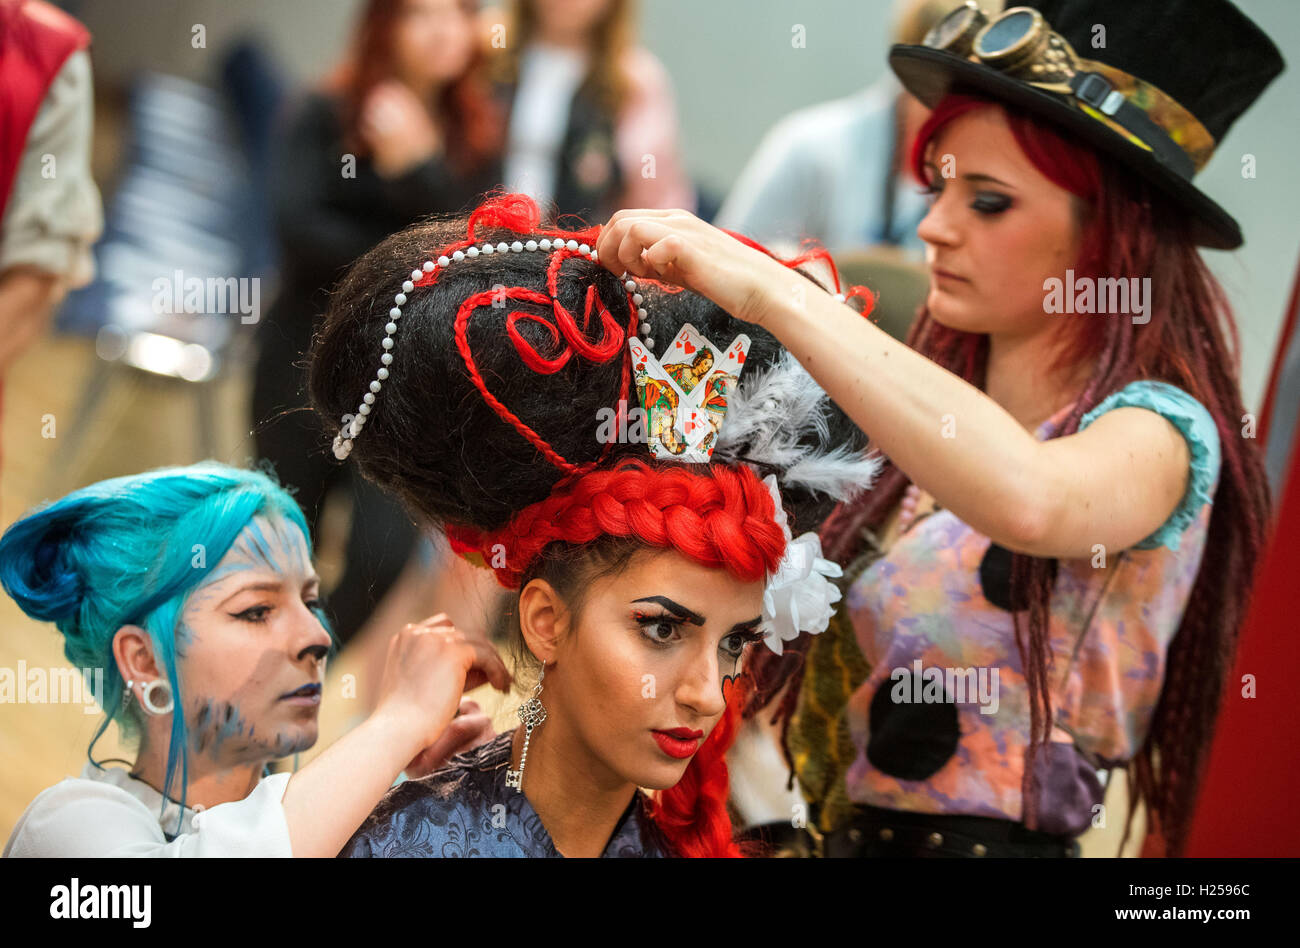 Hairdressing College High Resolution Stock Photography And Images Alamy